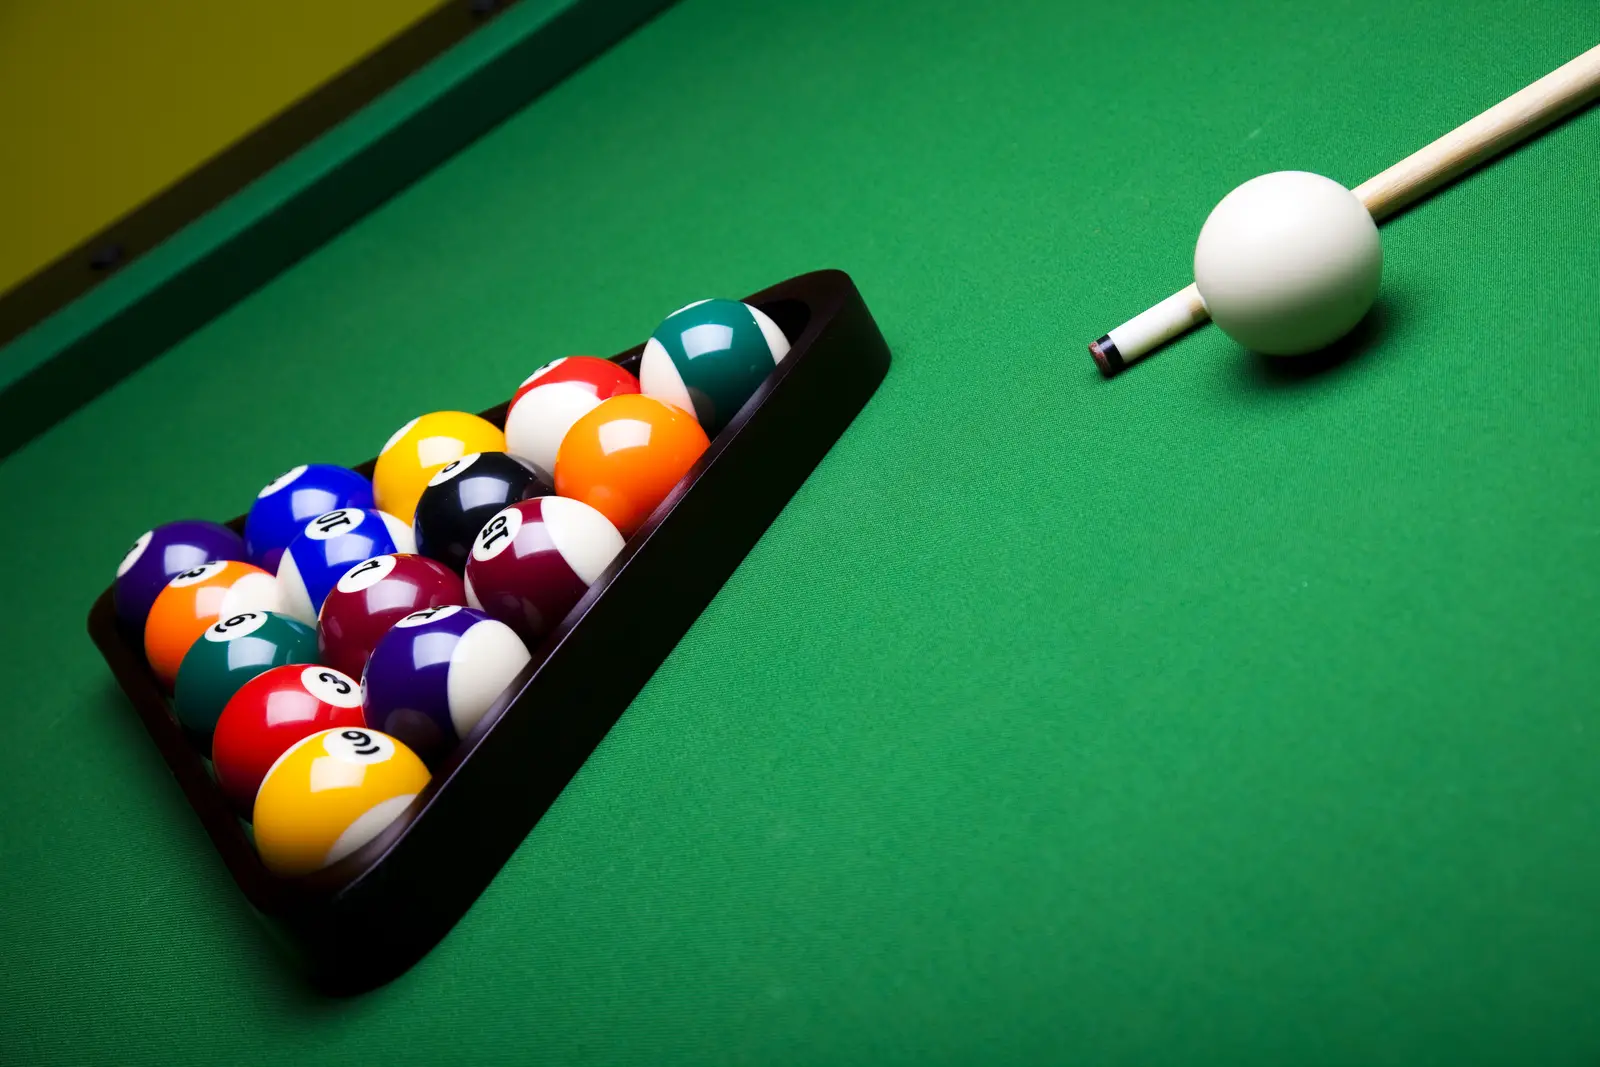 How Many Pool Balls Are There?